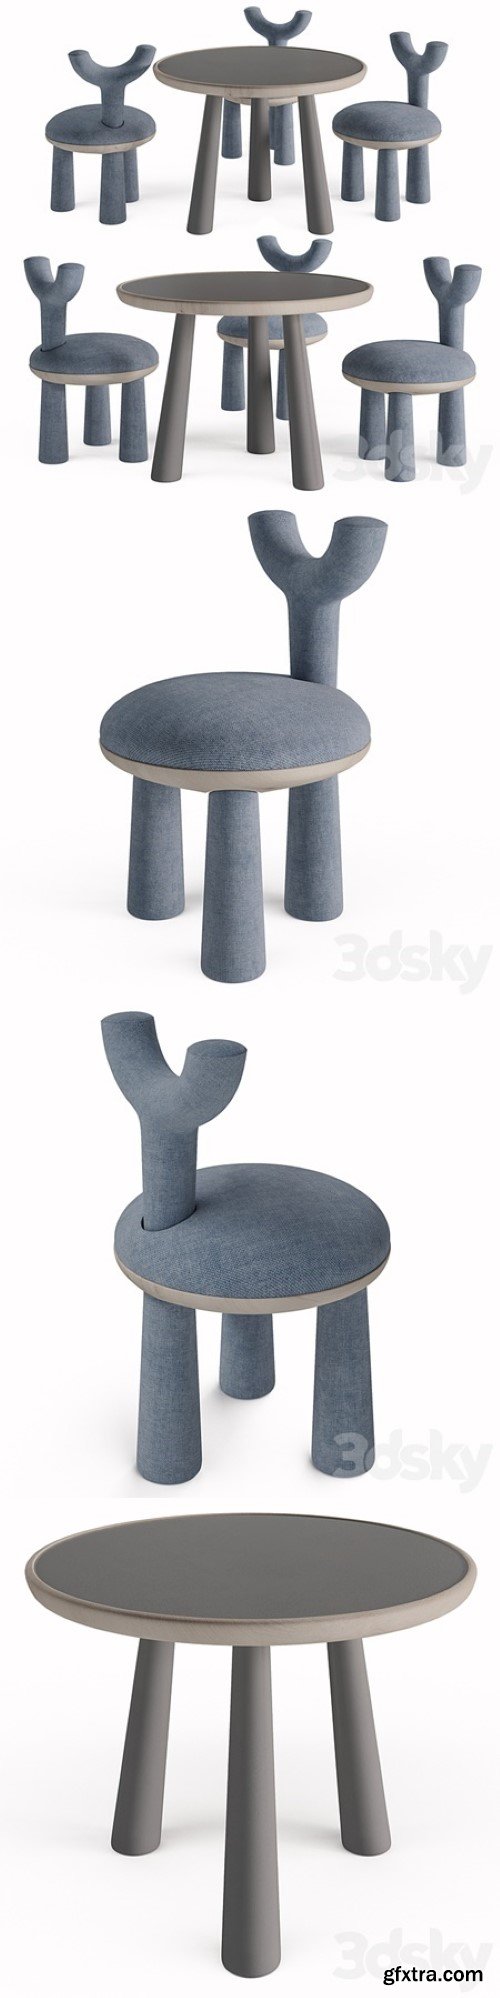 Pro 3DSky - Children Table and Chairs set by Flow